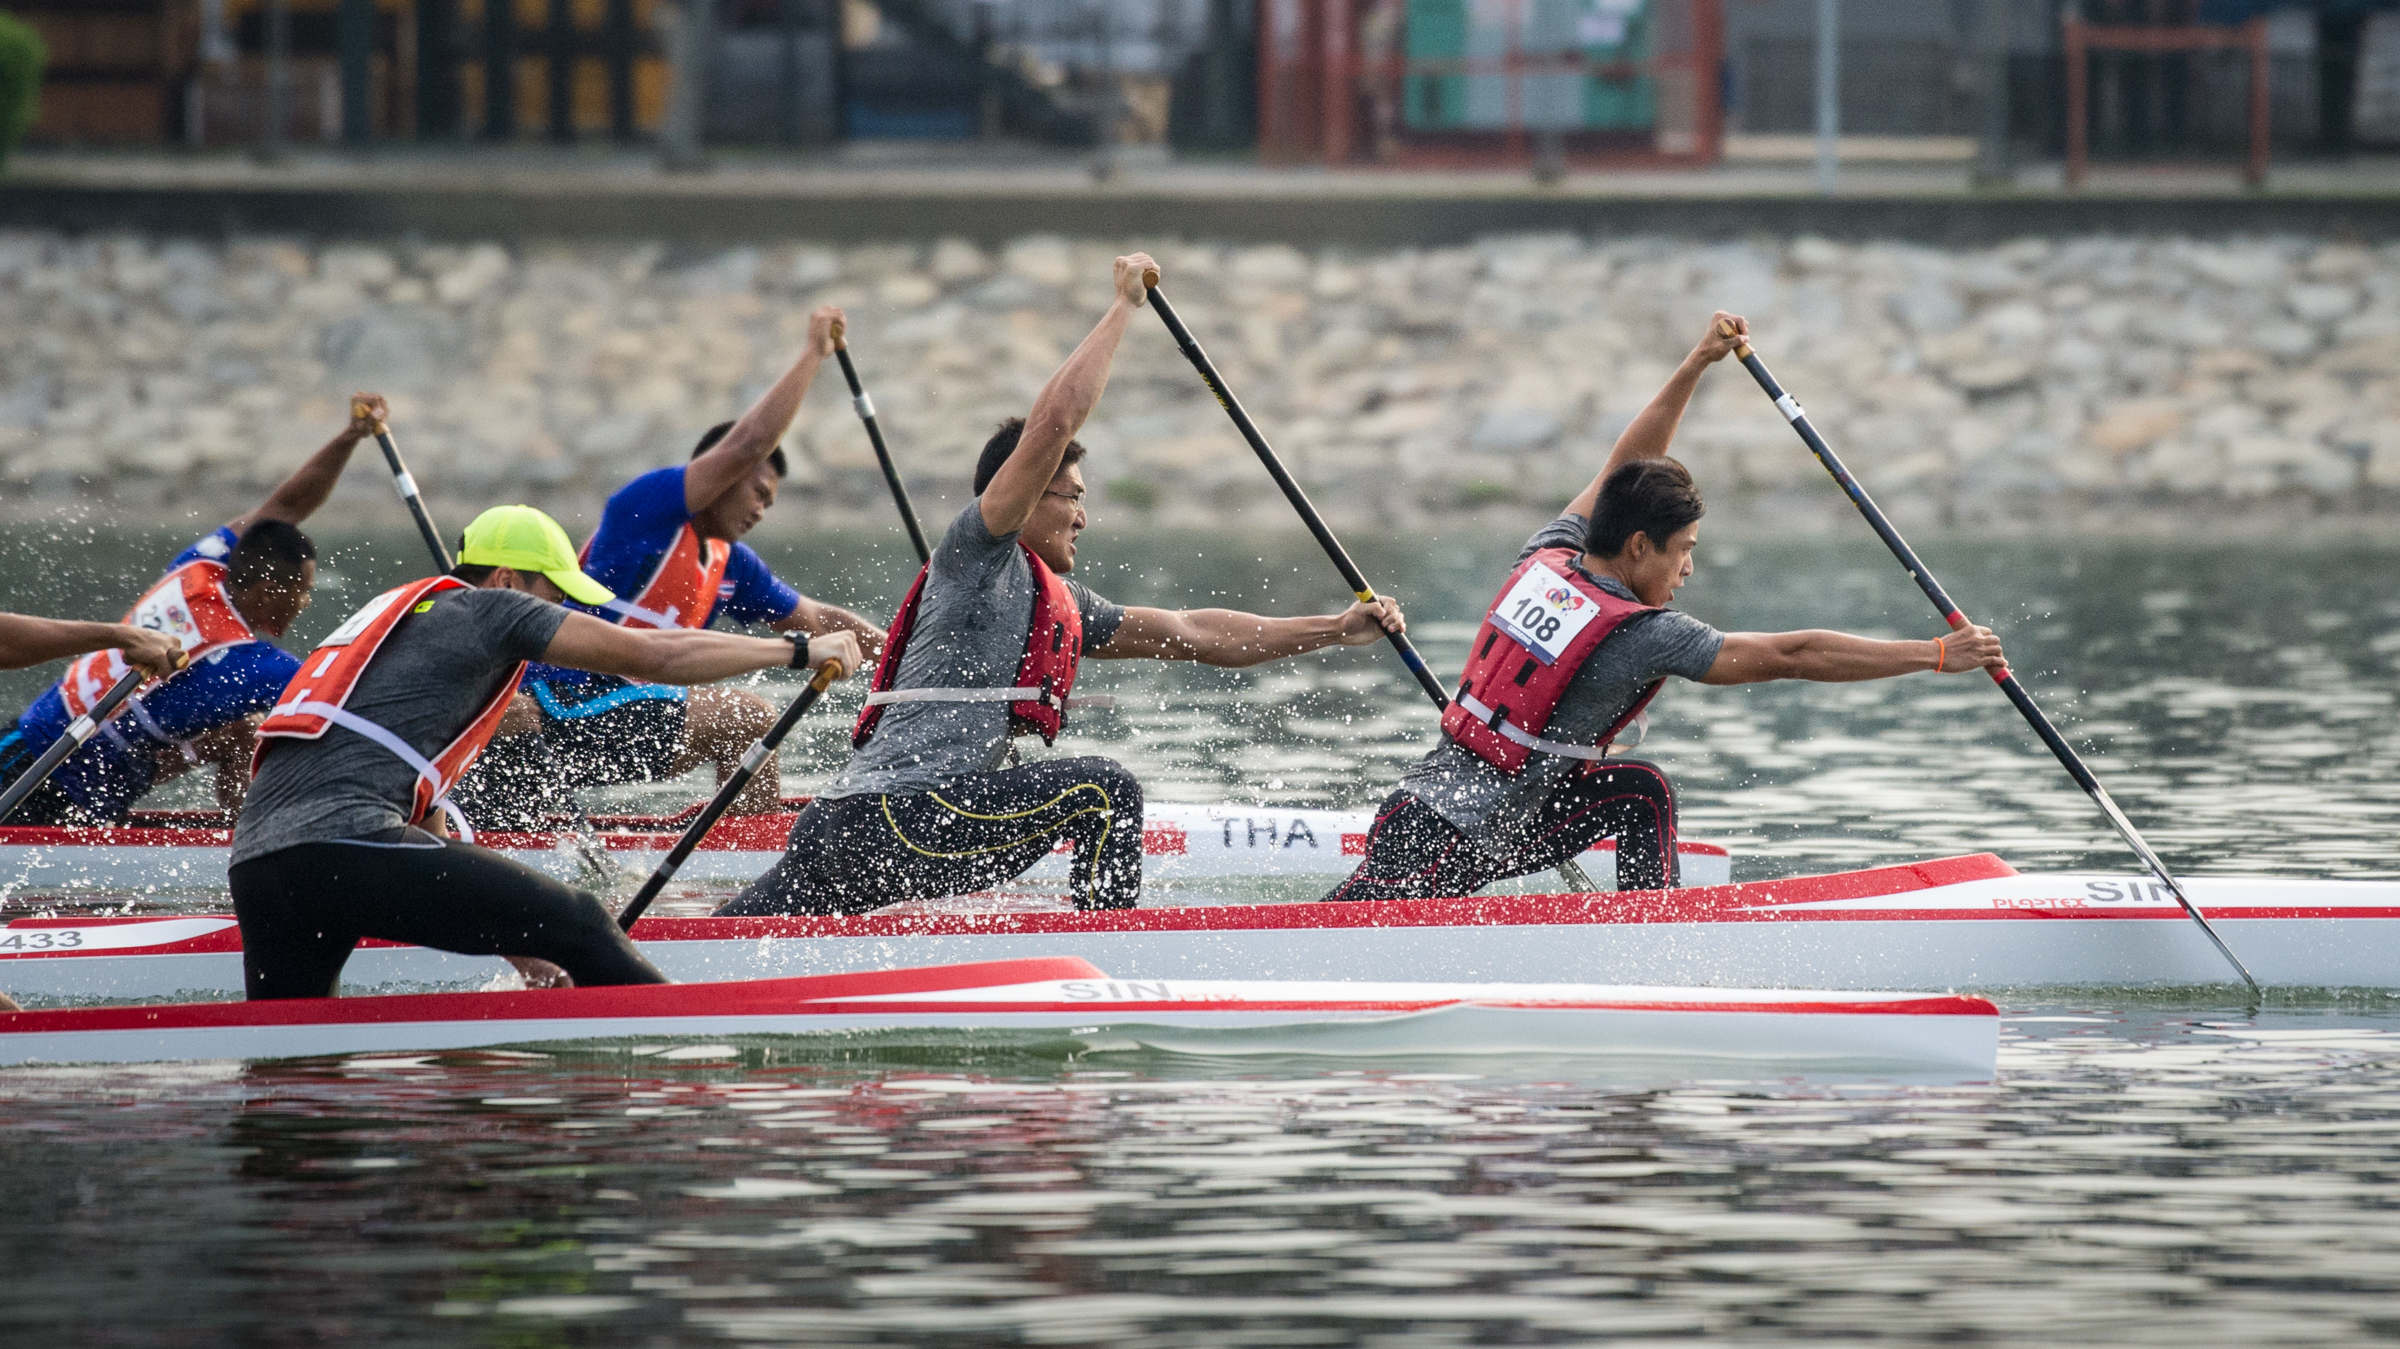 A Singaporean pair take an early lead in the Canoeing competition of the ASEAN University Games at the Marina Channel.